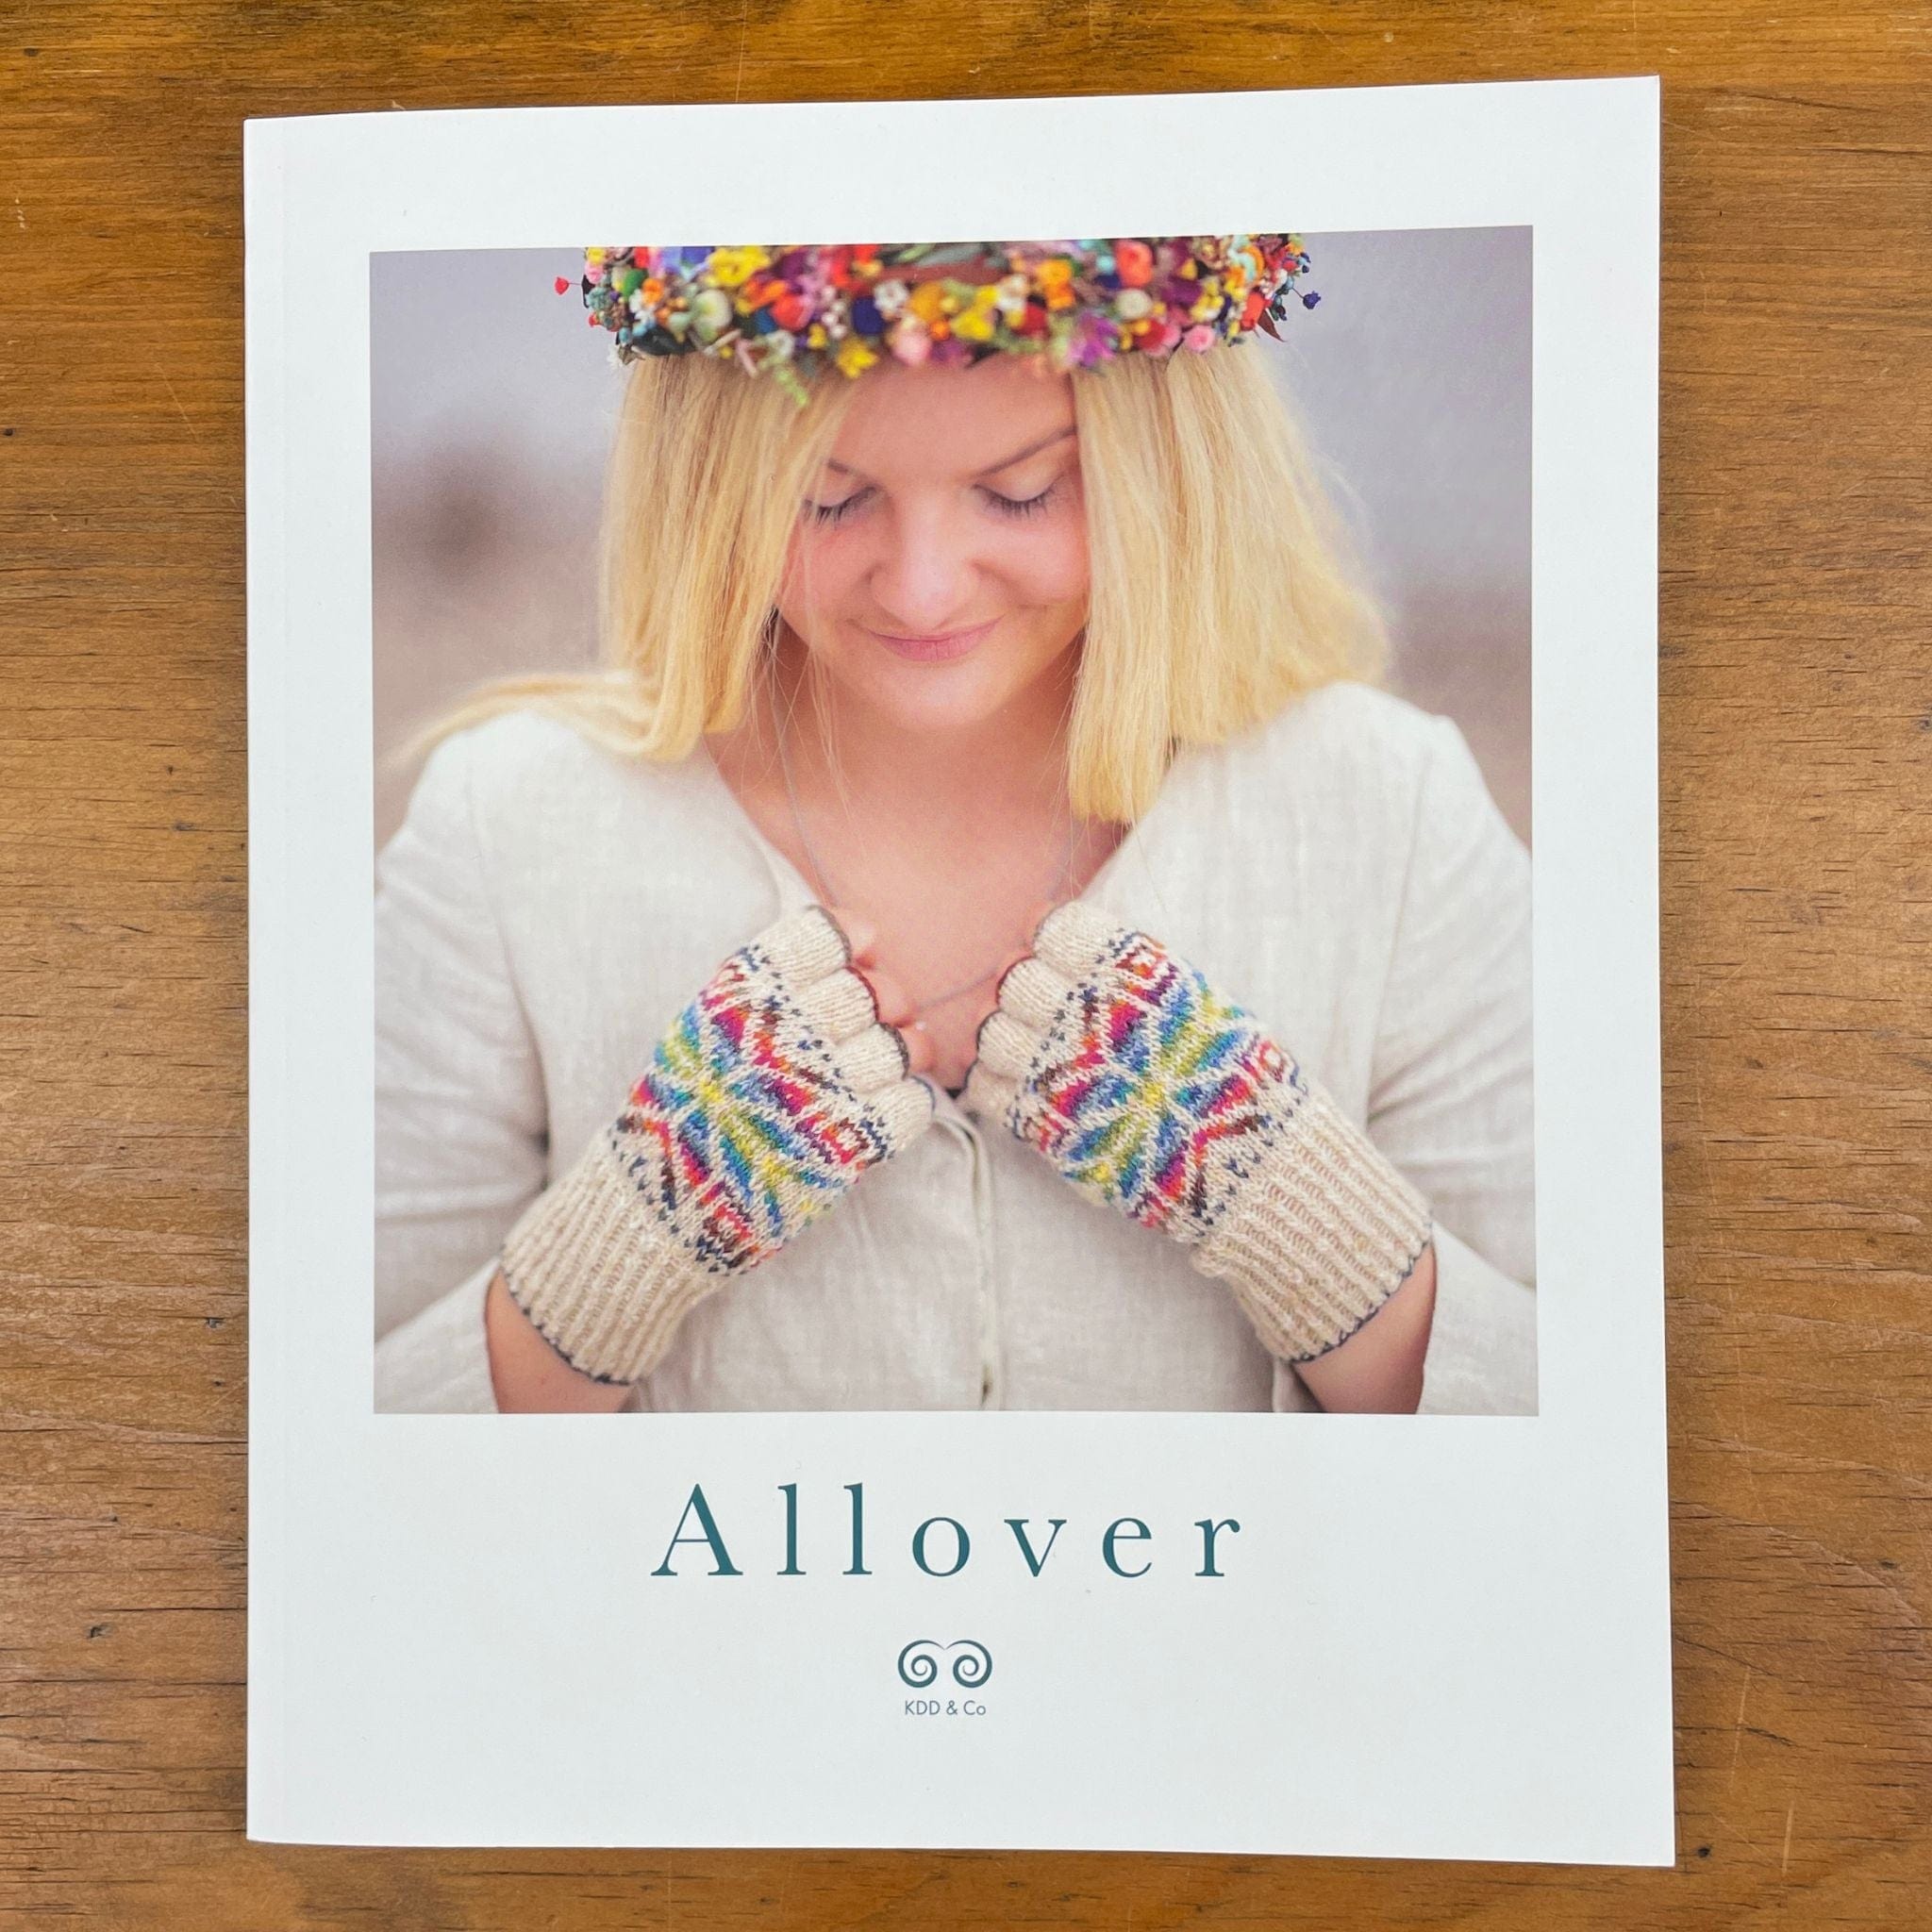 Allover is published! – KDD & Co